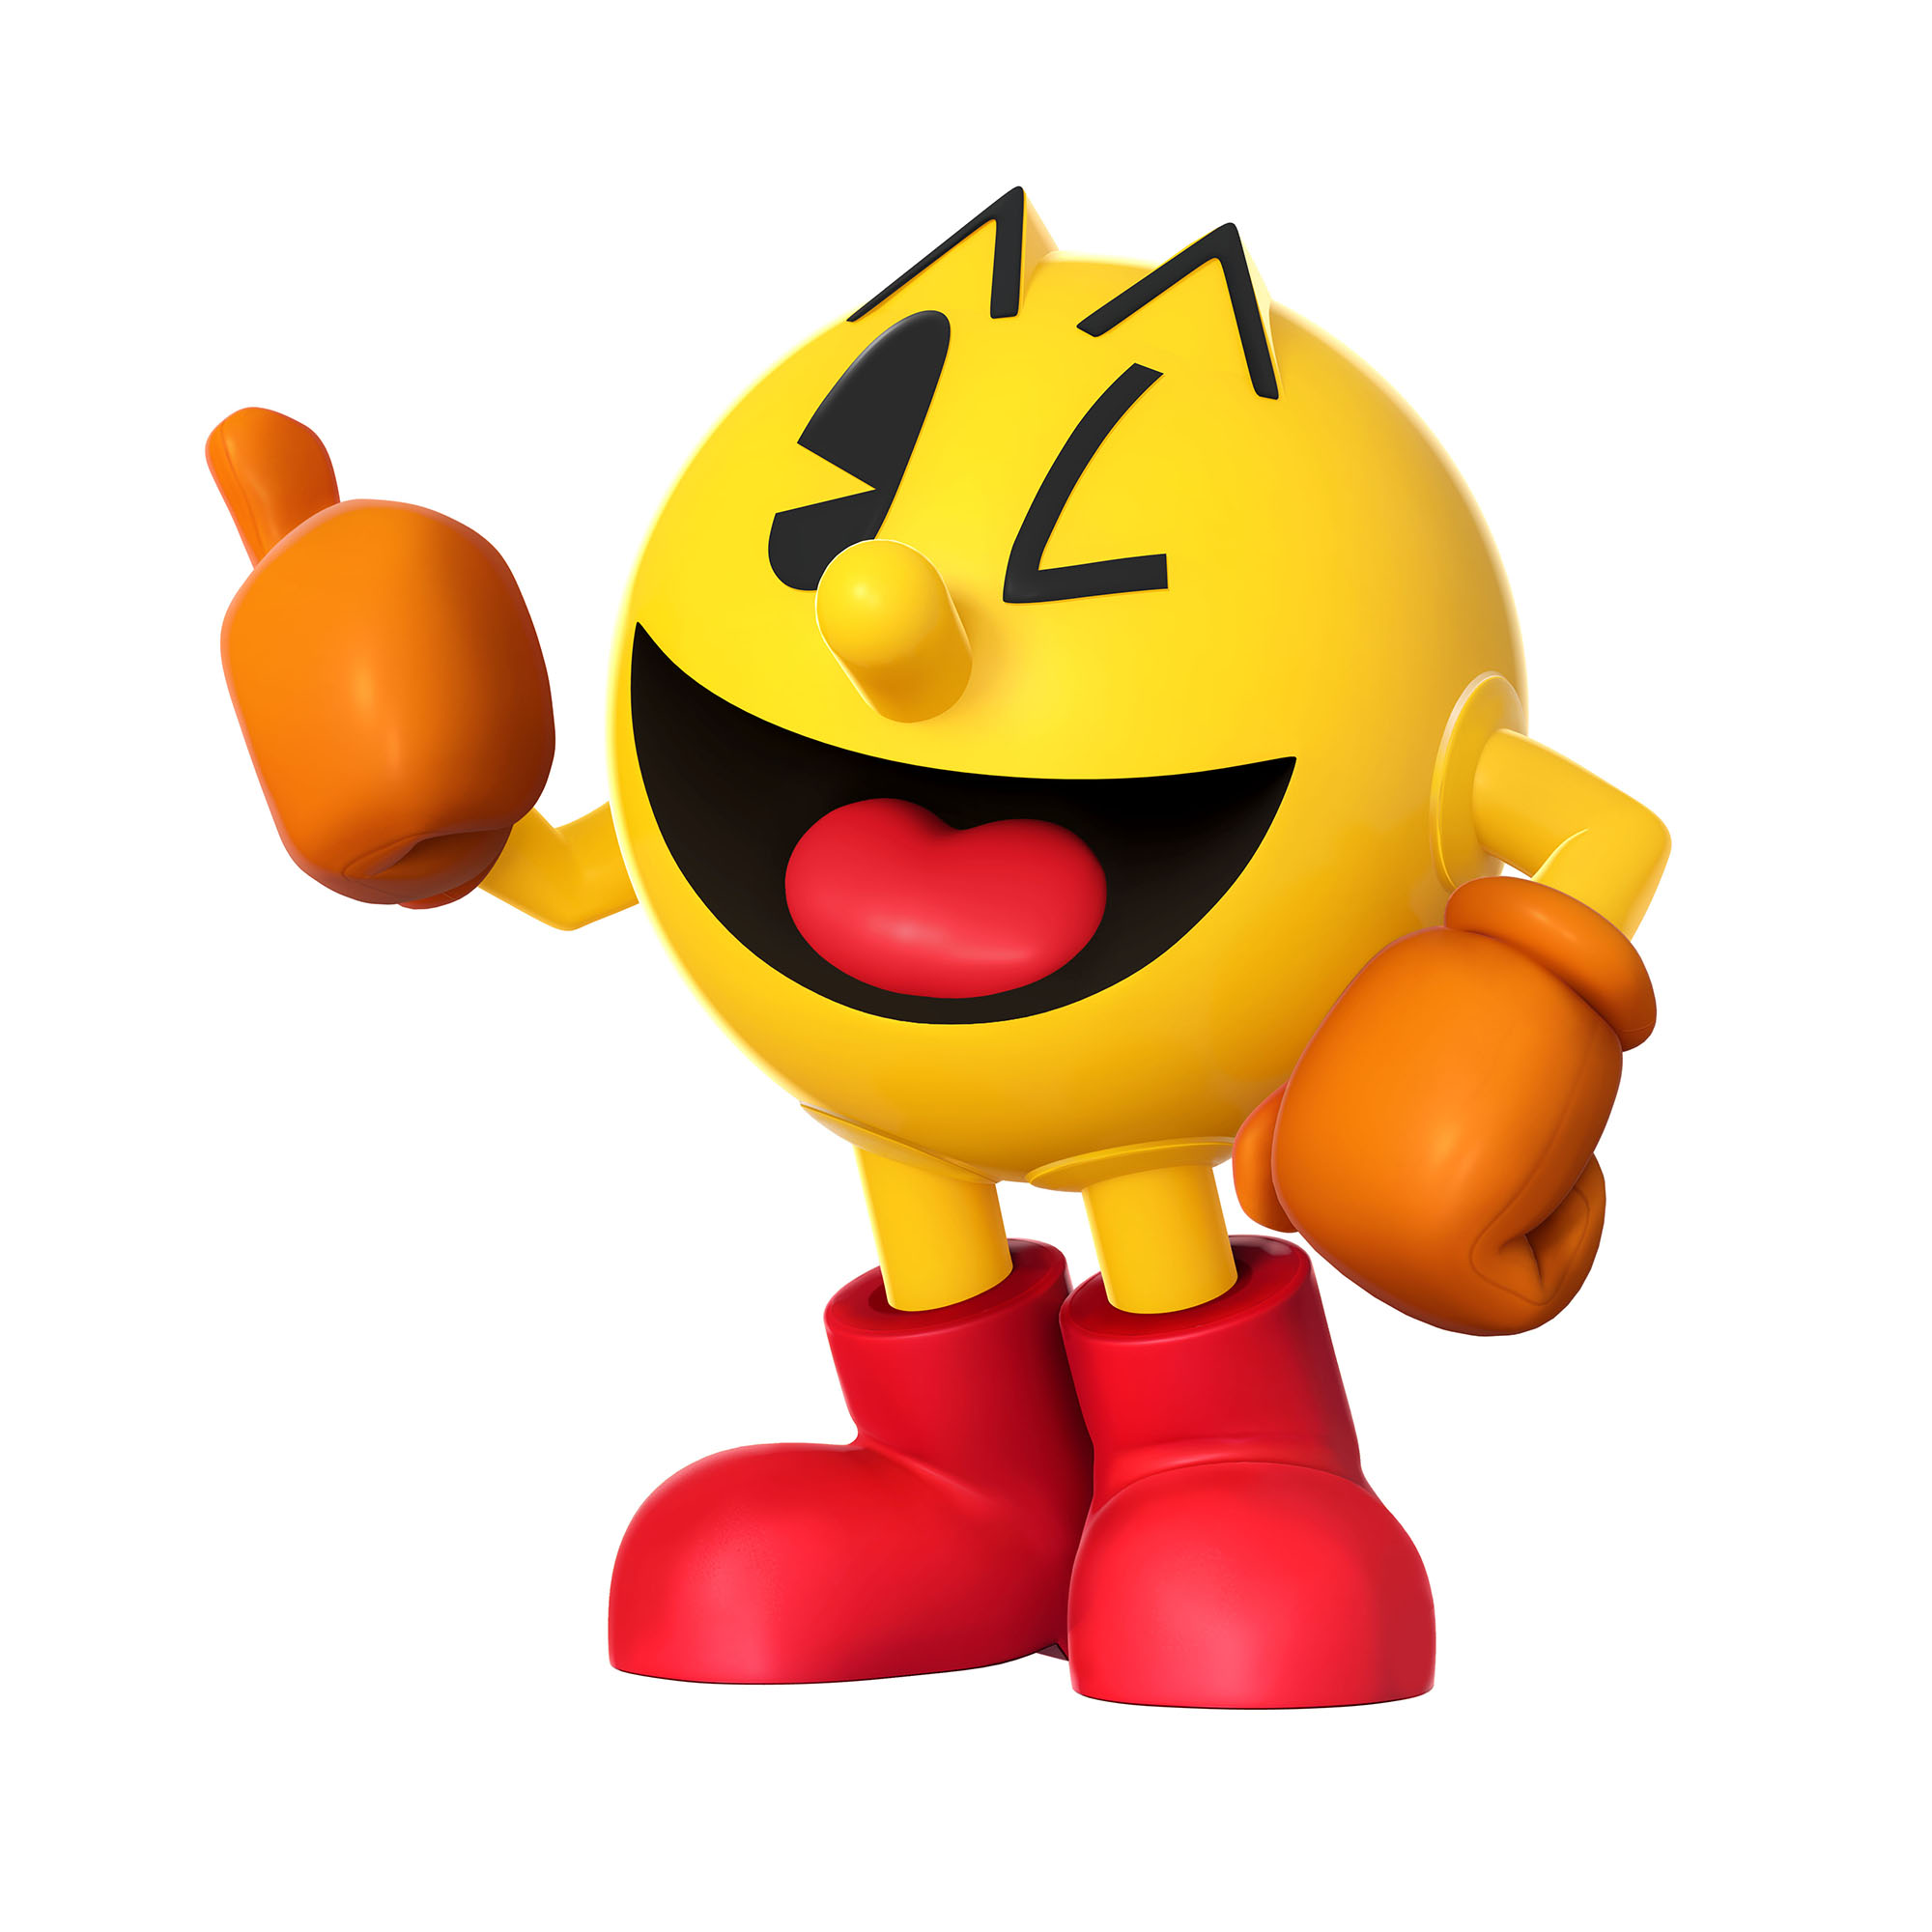 who invented pac man